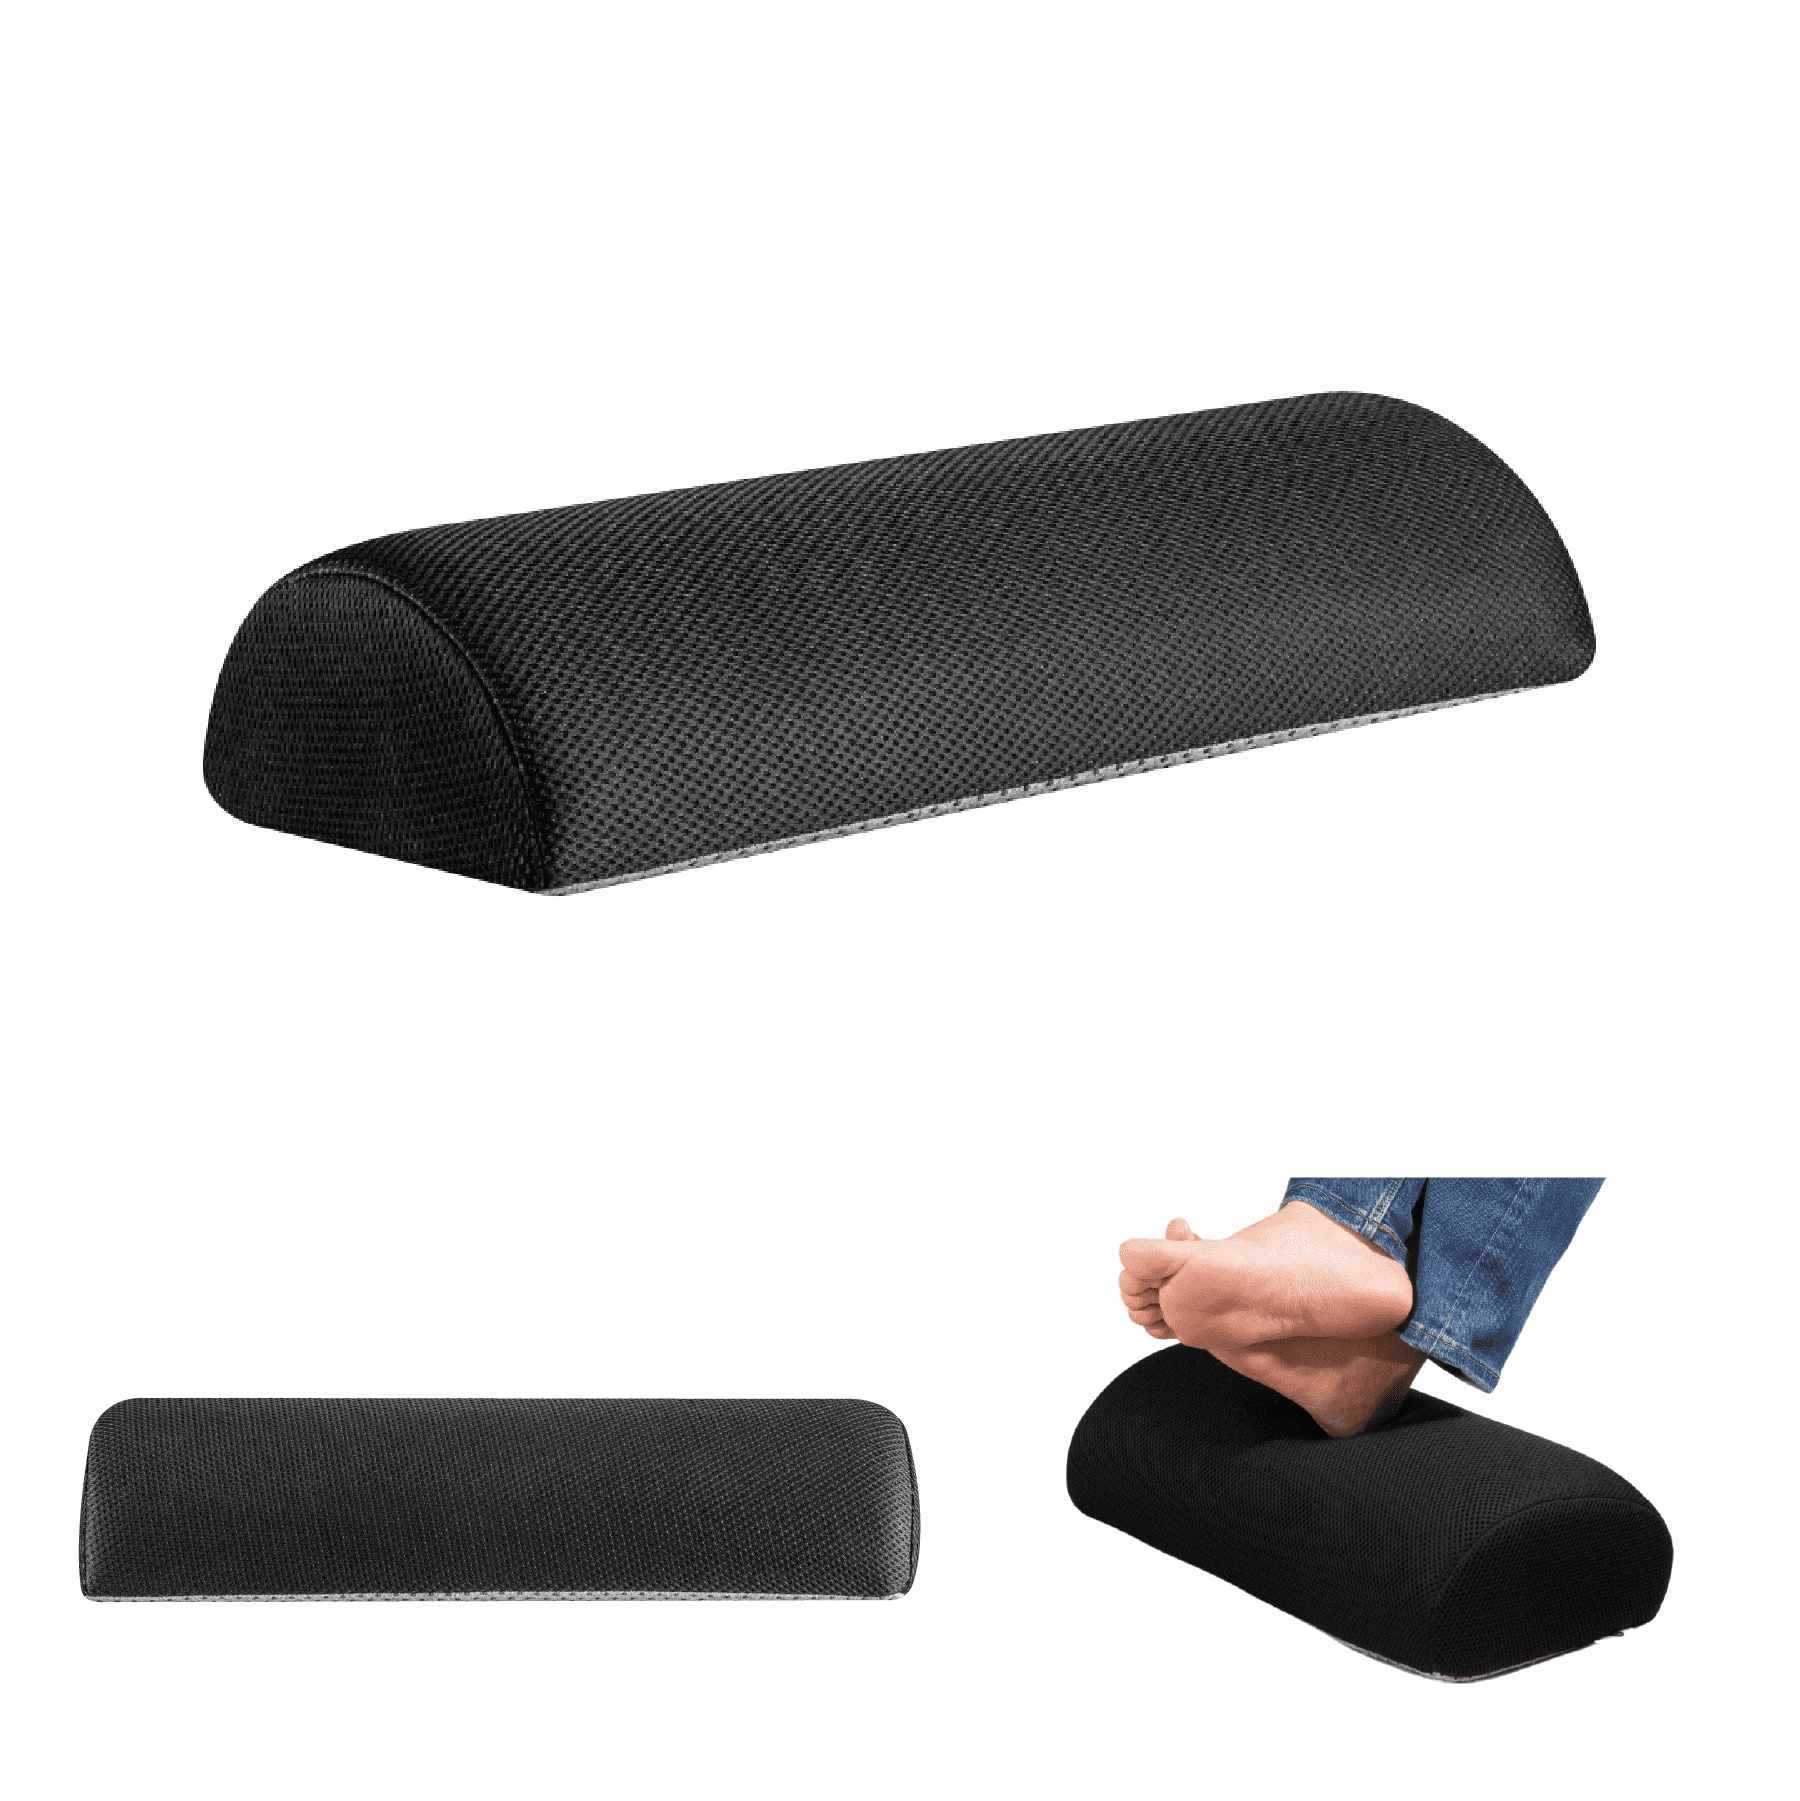 BeatriX - High Resilience (HR) Foam Foot Rest Cushion for Feet & leg Support - Firm Support The White Willow Adjustable Footrest- 3 layers 